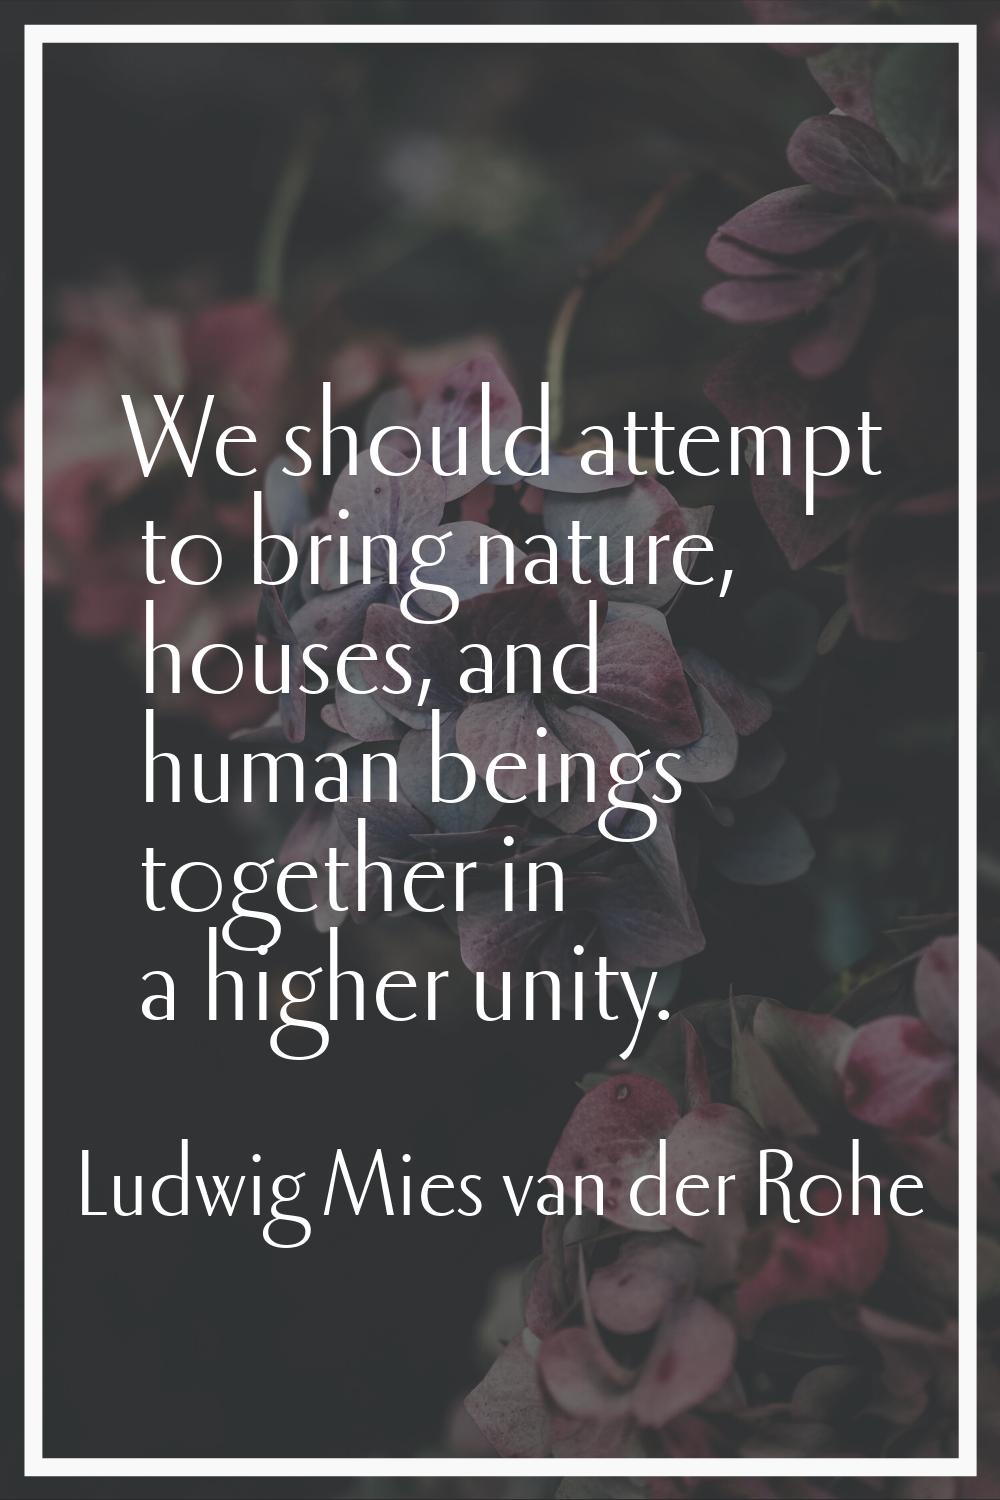 We should attempt to bring nature, houses, and human beings together in a higher unity.